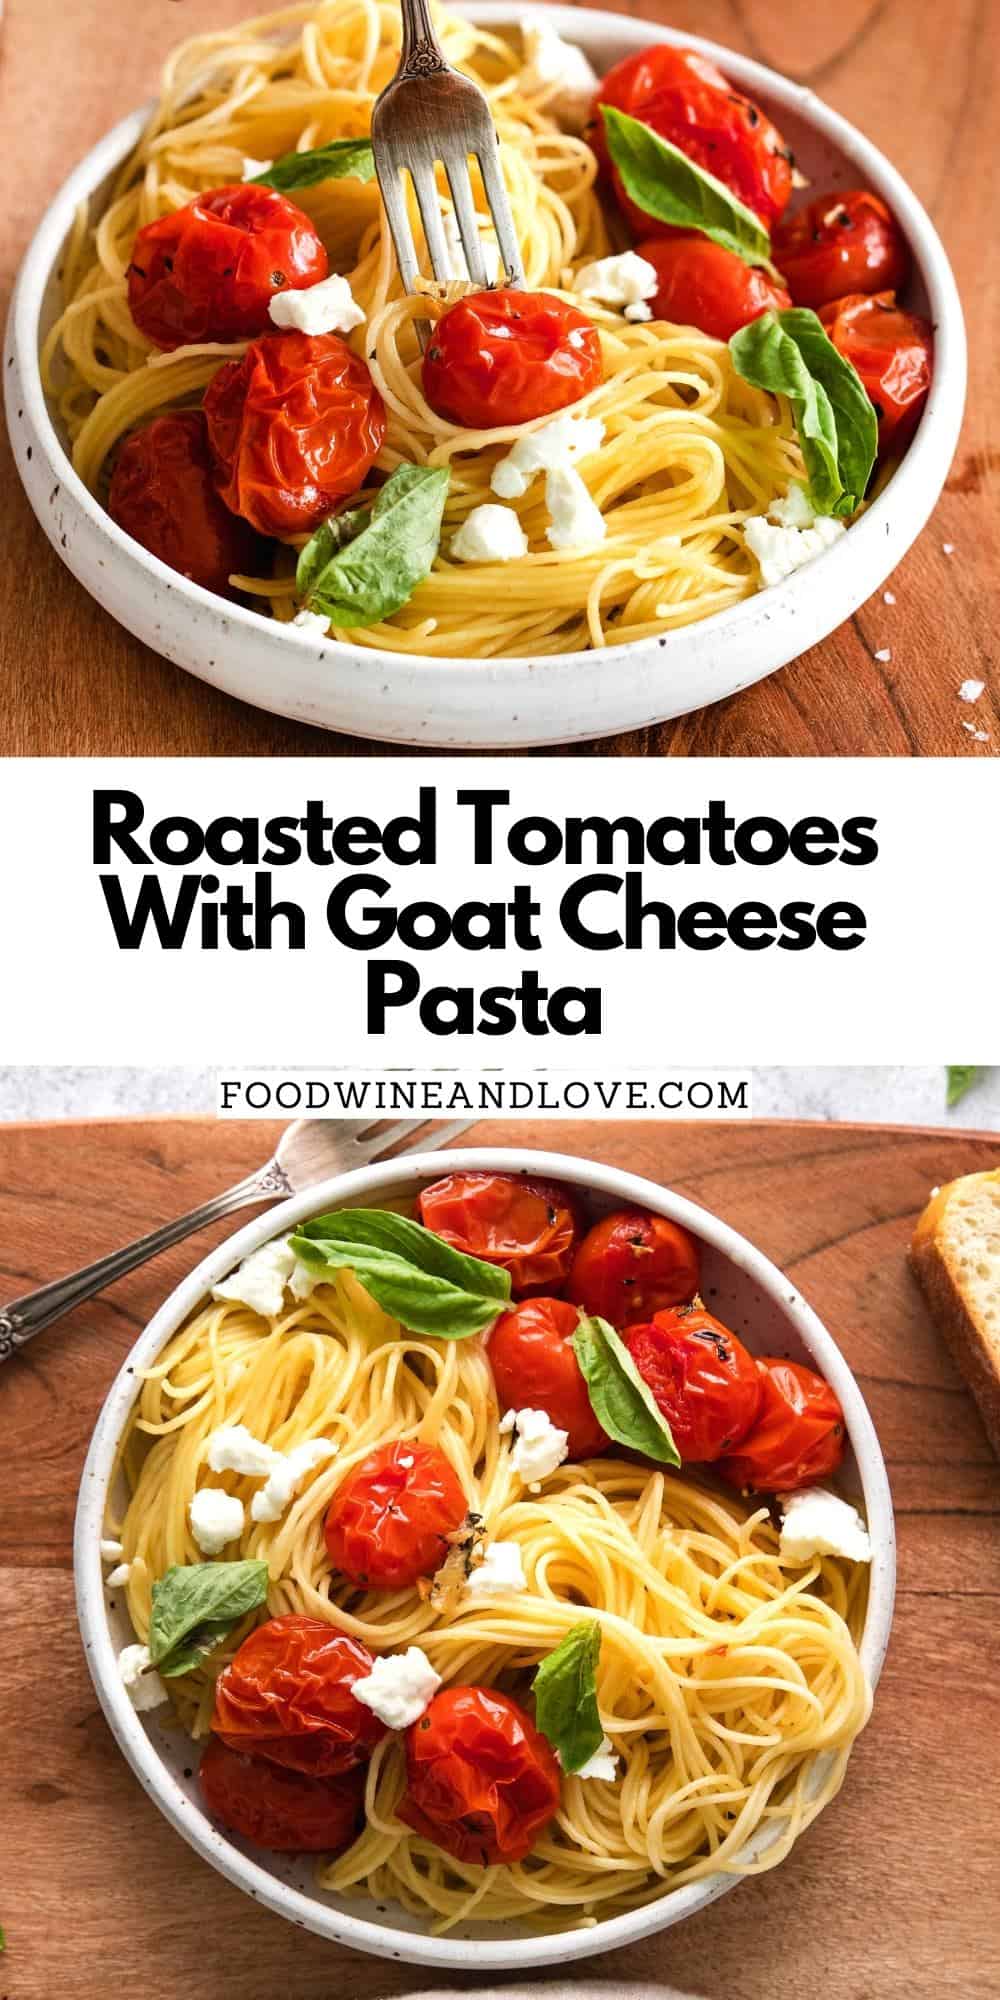 Roasted Tomatoes With Goat Cheese Pasta